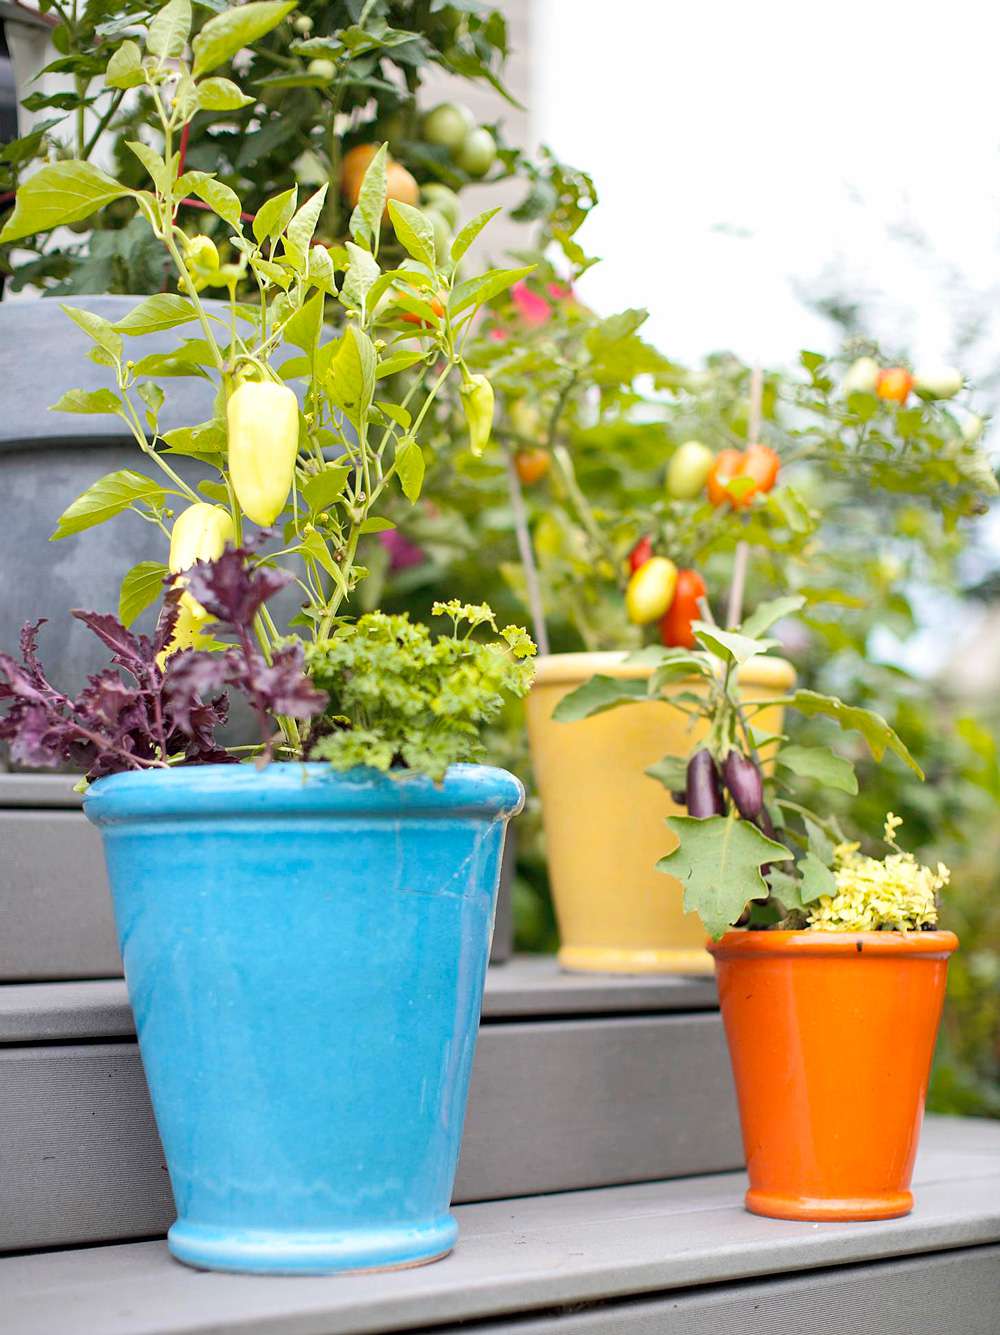 + CAN PLANT IN GARDEN AREA or POT-CONTAINER-PATIO "MINIATURE" HOT PEPPER SEEDS 